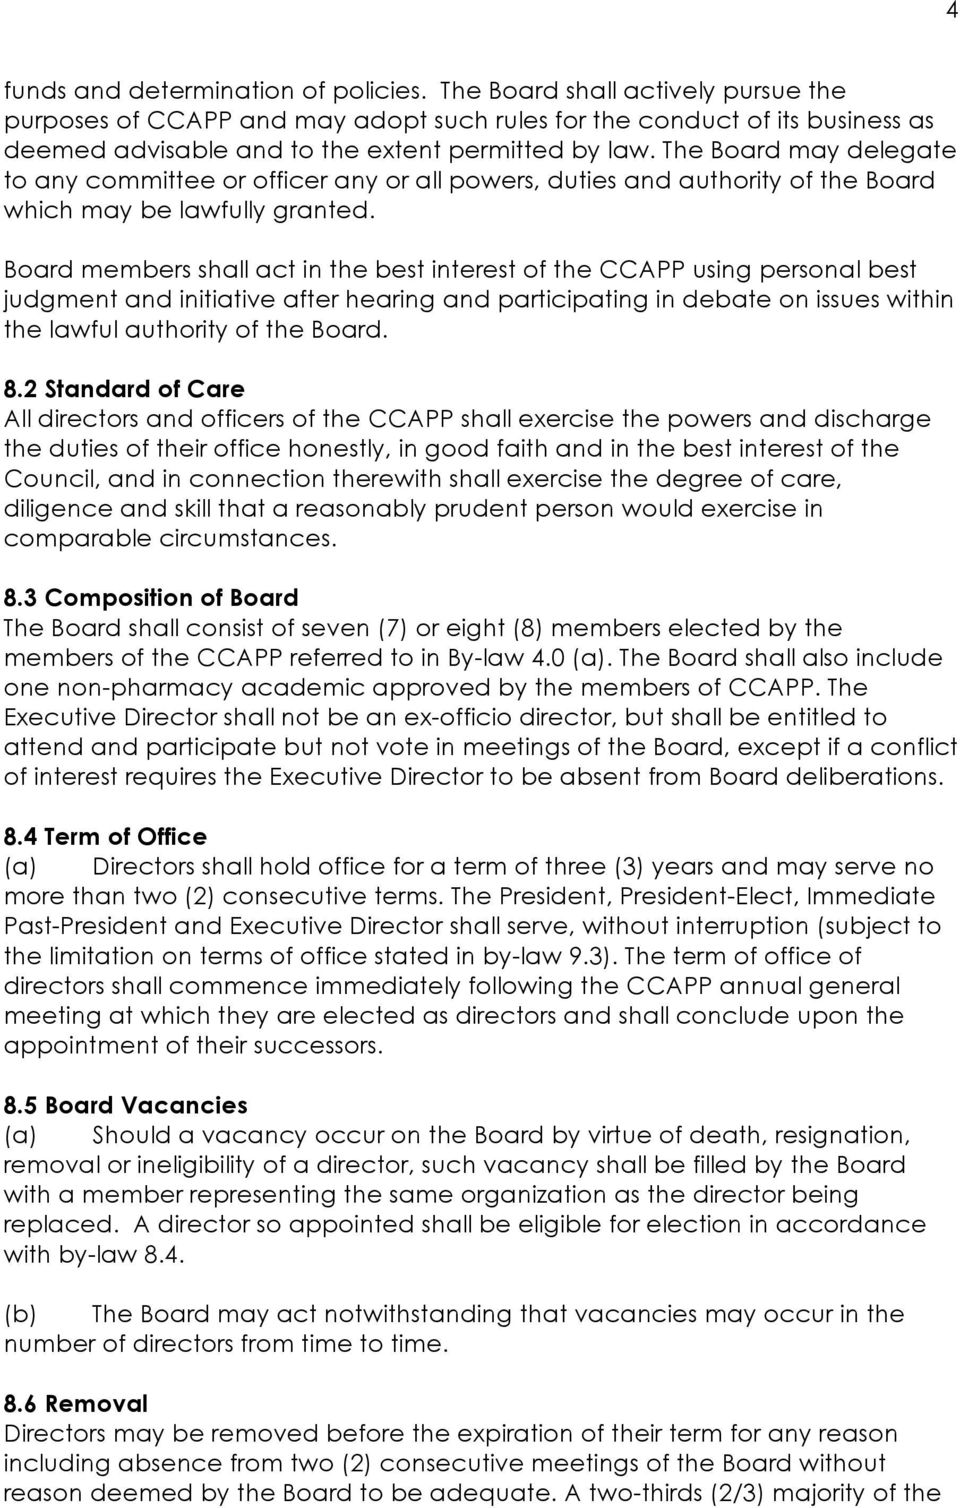 The Board may delegate to any committee or officer any or all powers, duties and authority of the Board which may be lawfully granted.